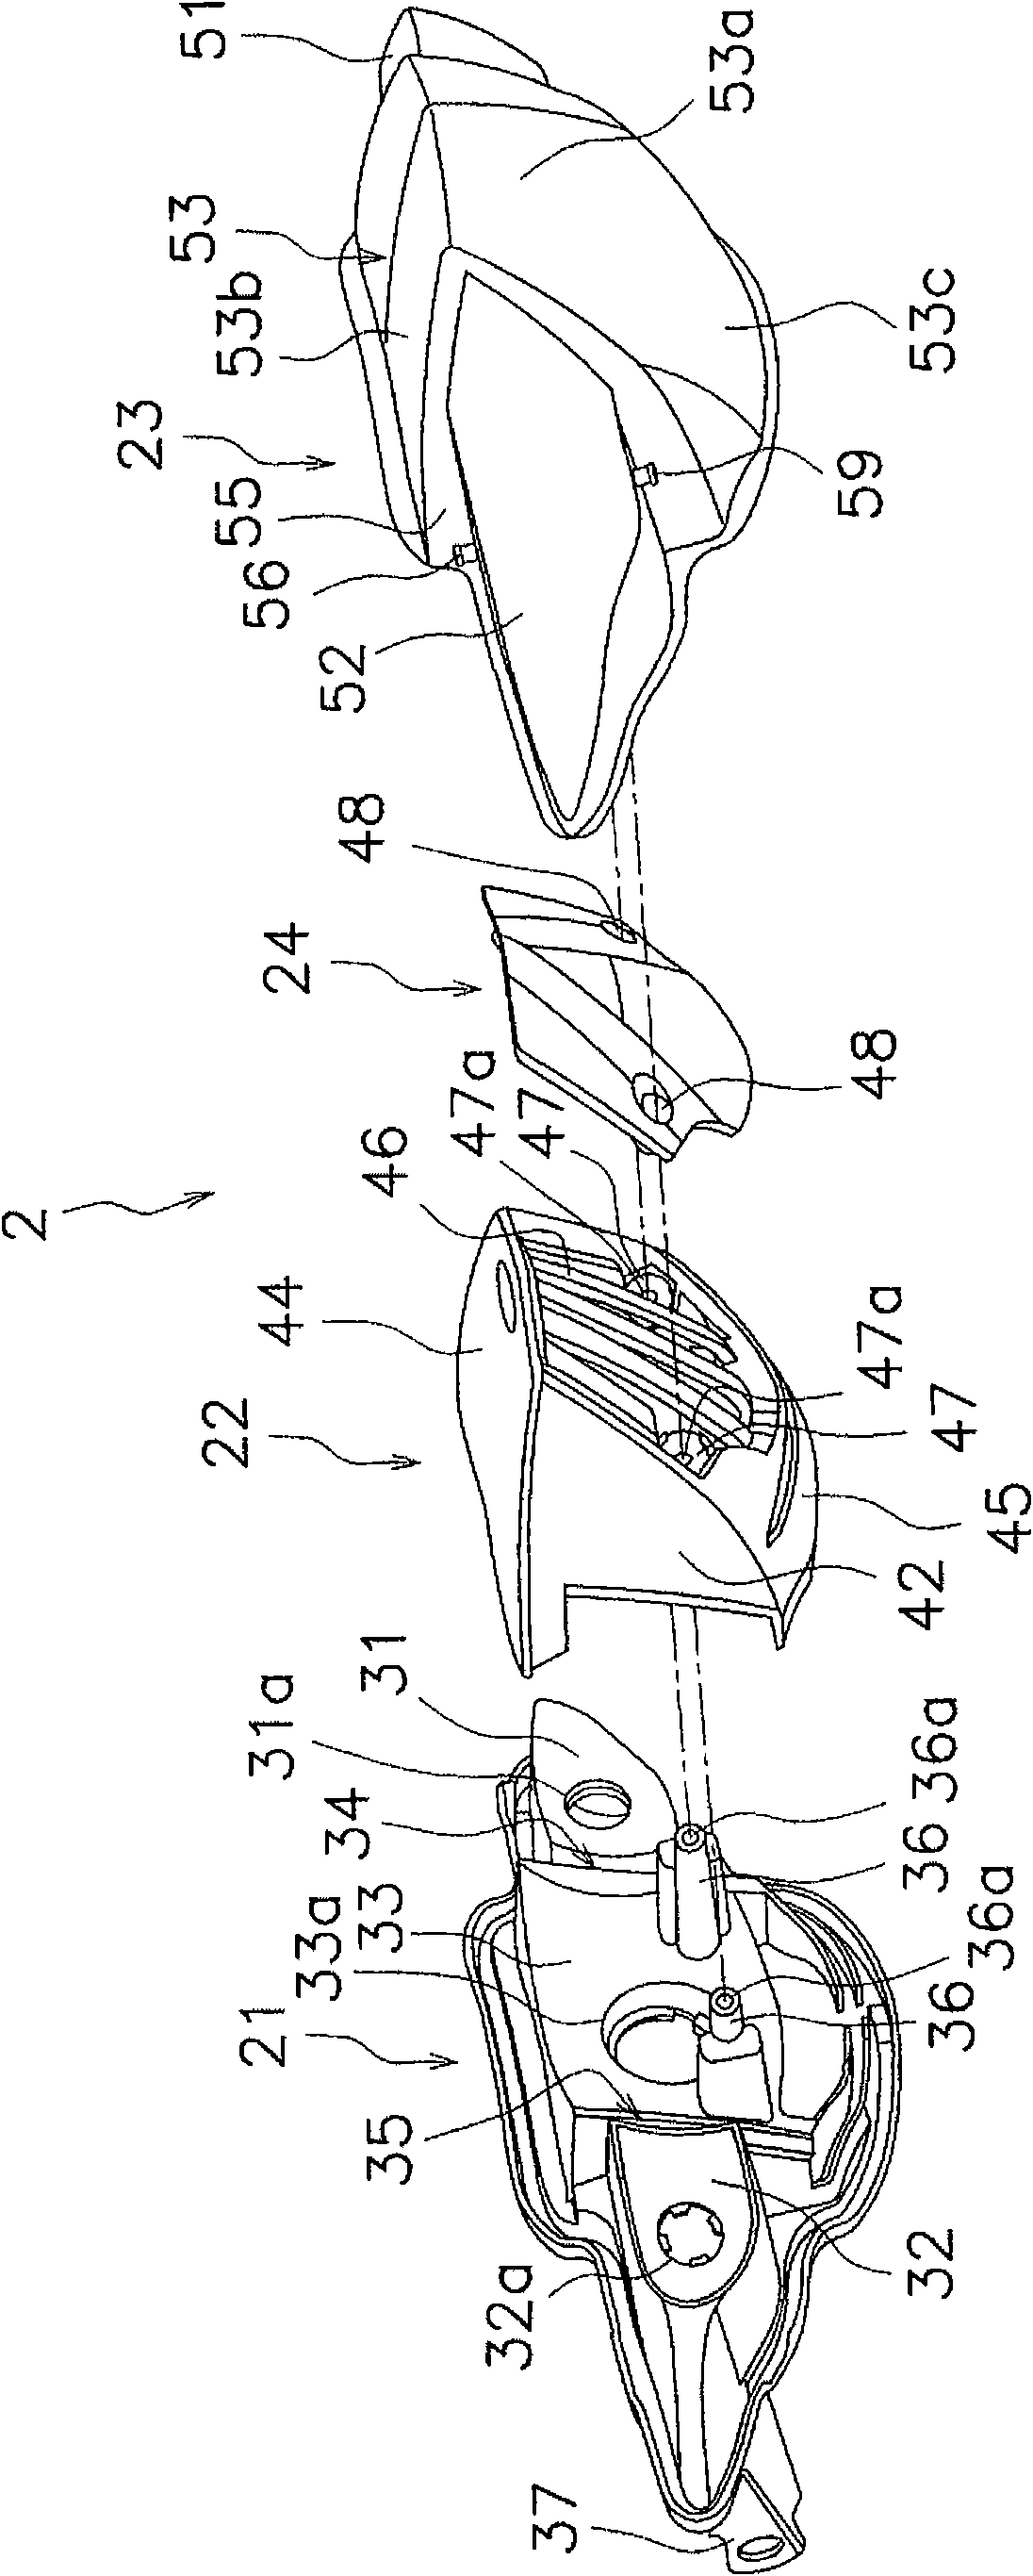 Tail light unit for motorcycle